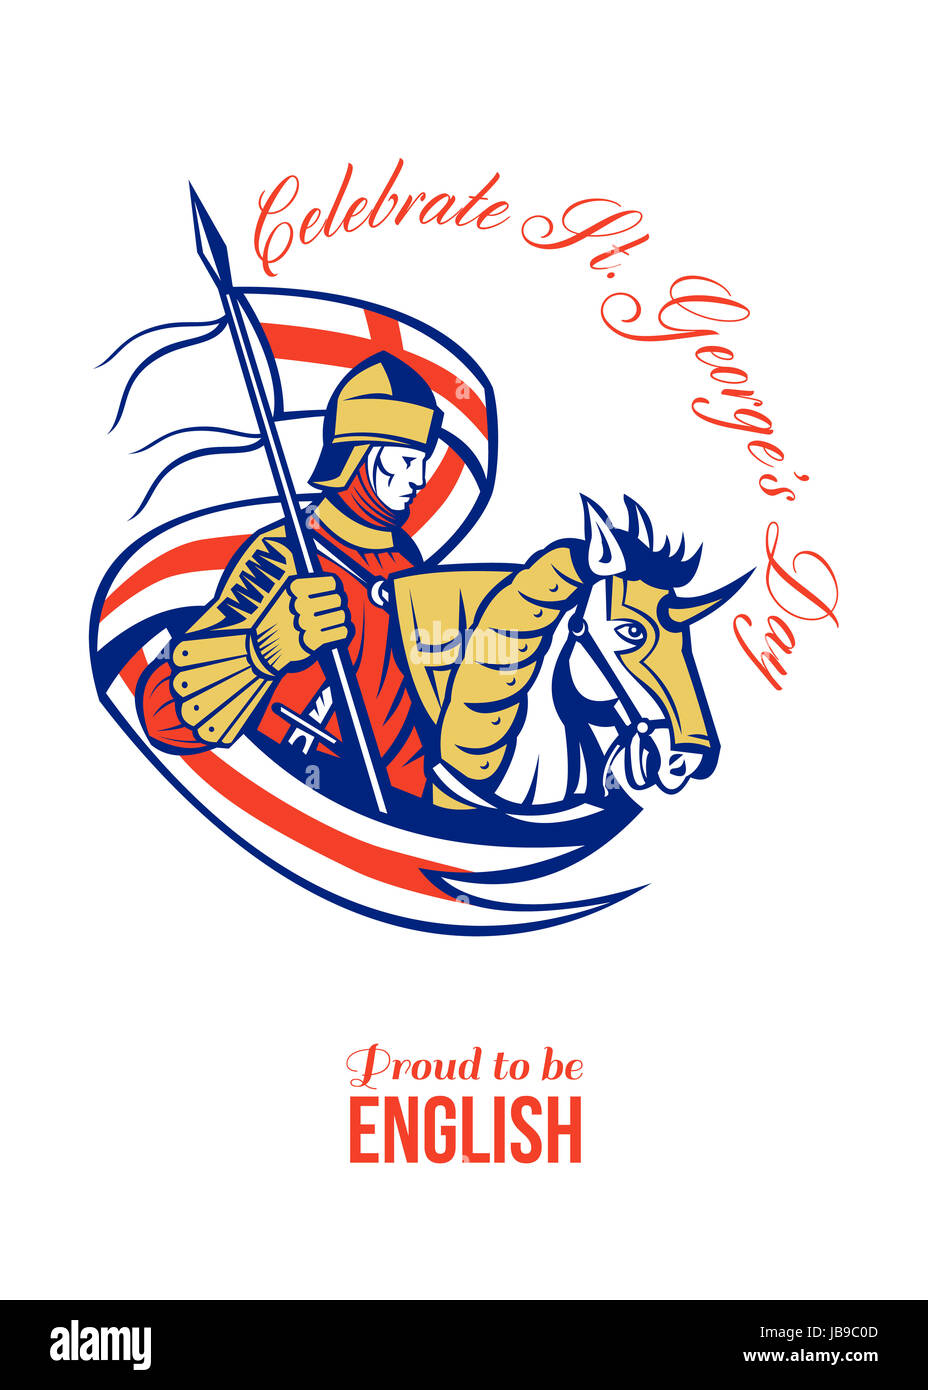 Poster greeting card Illustration of knight in full armor riding a horse armed with lance with England English flag in background done in retro style with words Celebrate St. George's Day Proud to Be English. Stock Photo